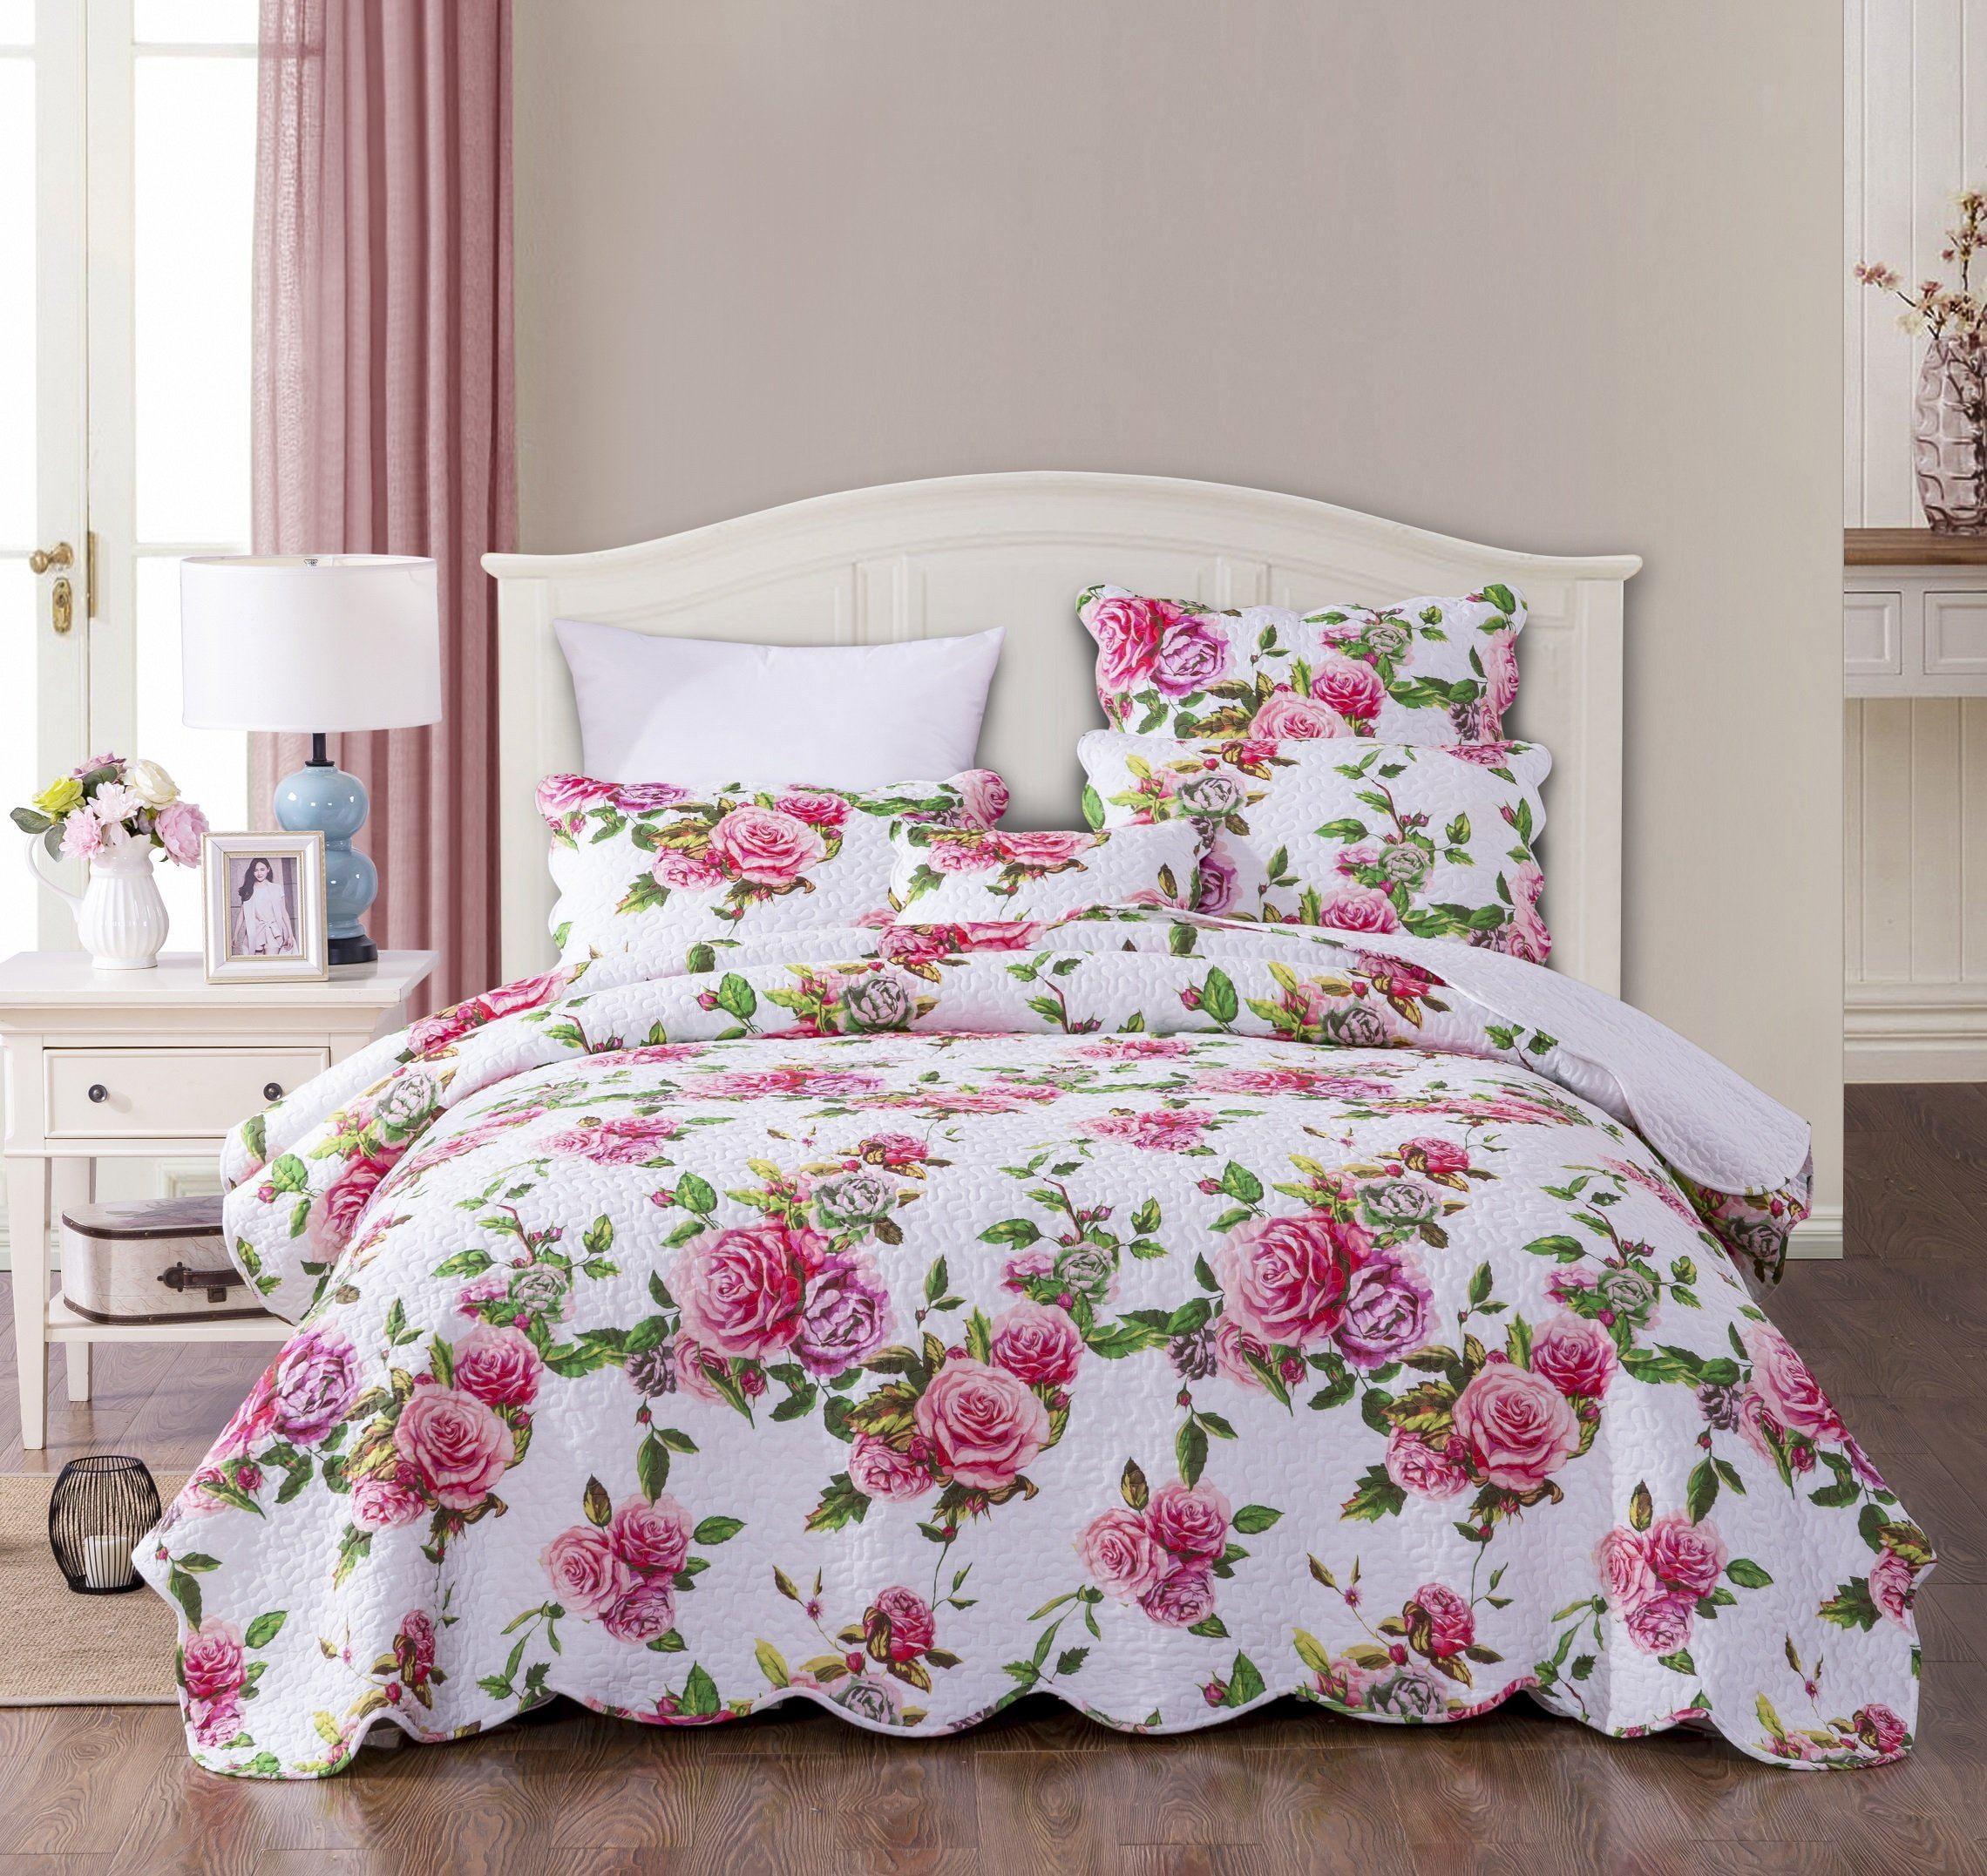 Dada Bedding Romantic Roses Lovely Spring Pink Floral Quilted Scalloped